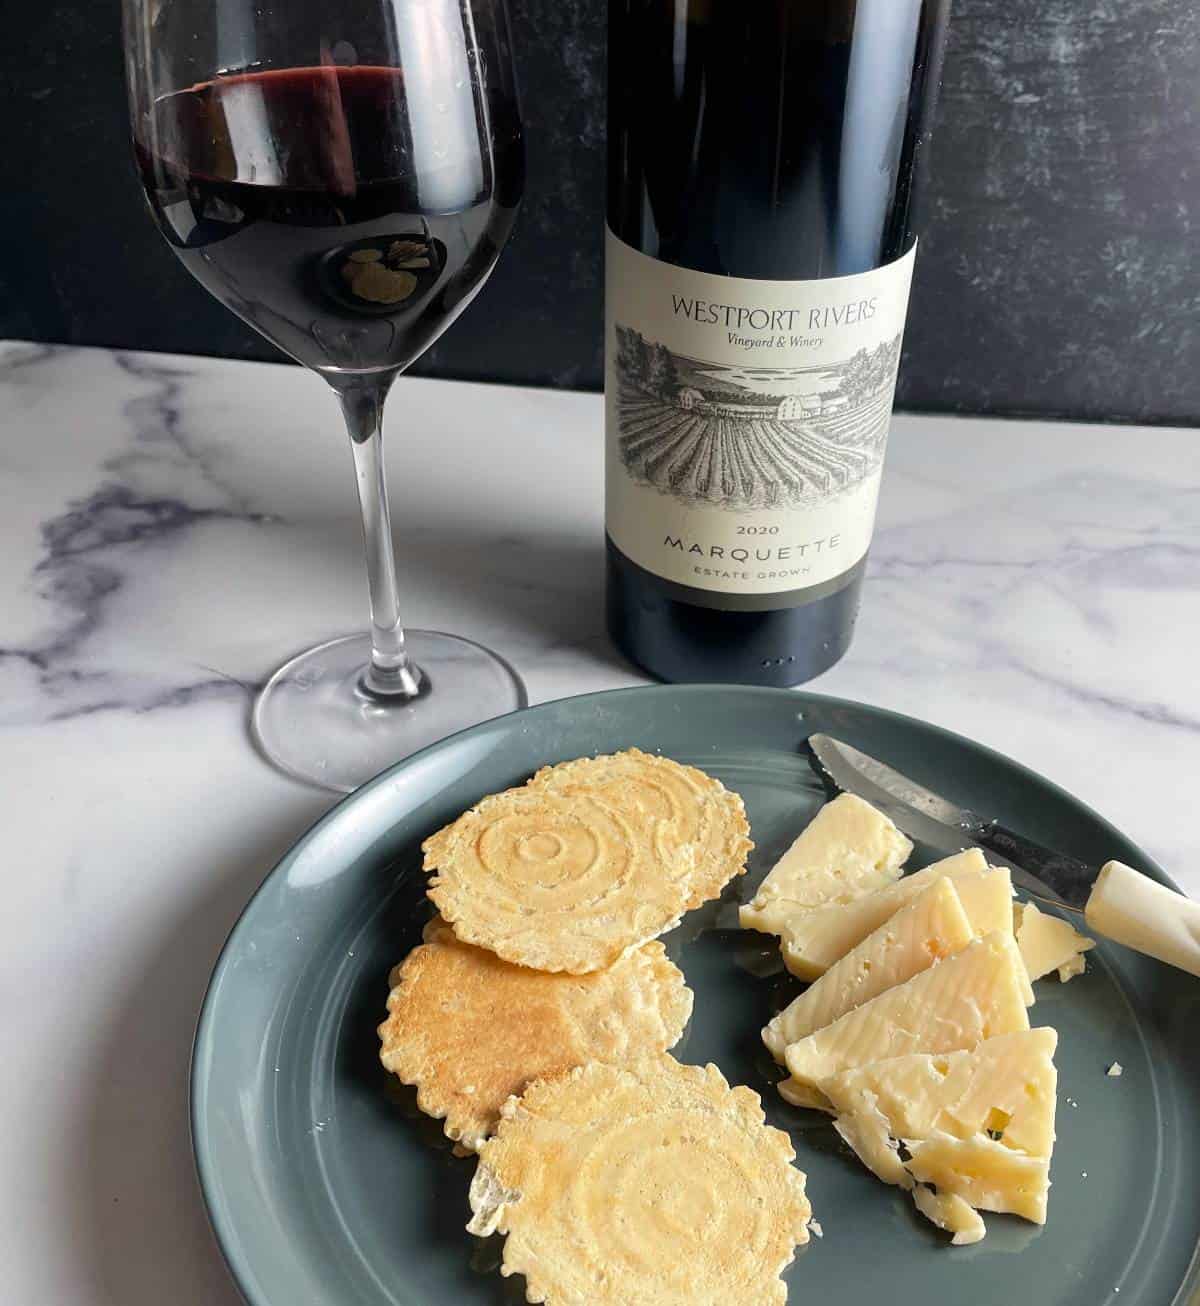 Marquette red wine served with a plate of cheese and crackers.